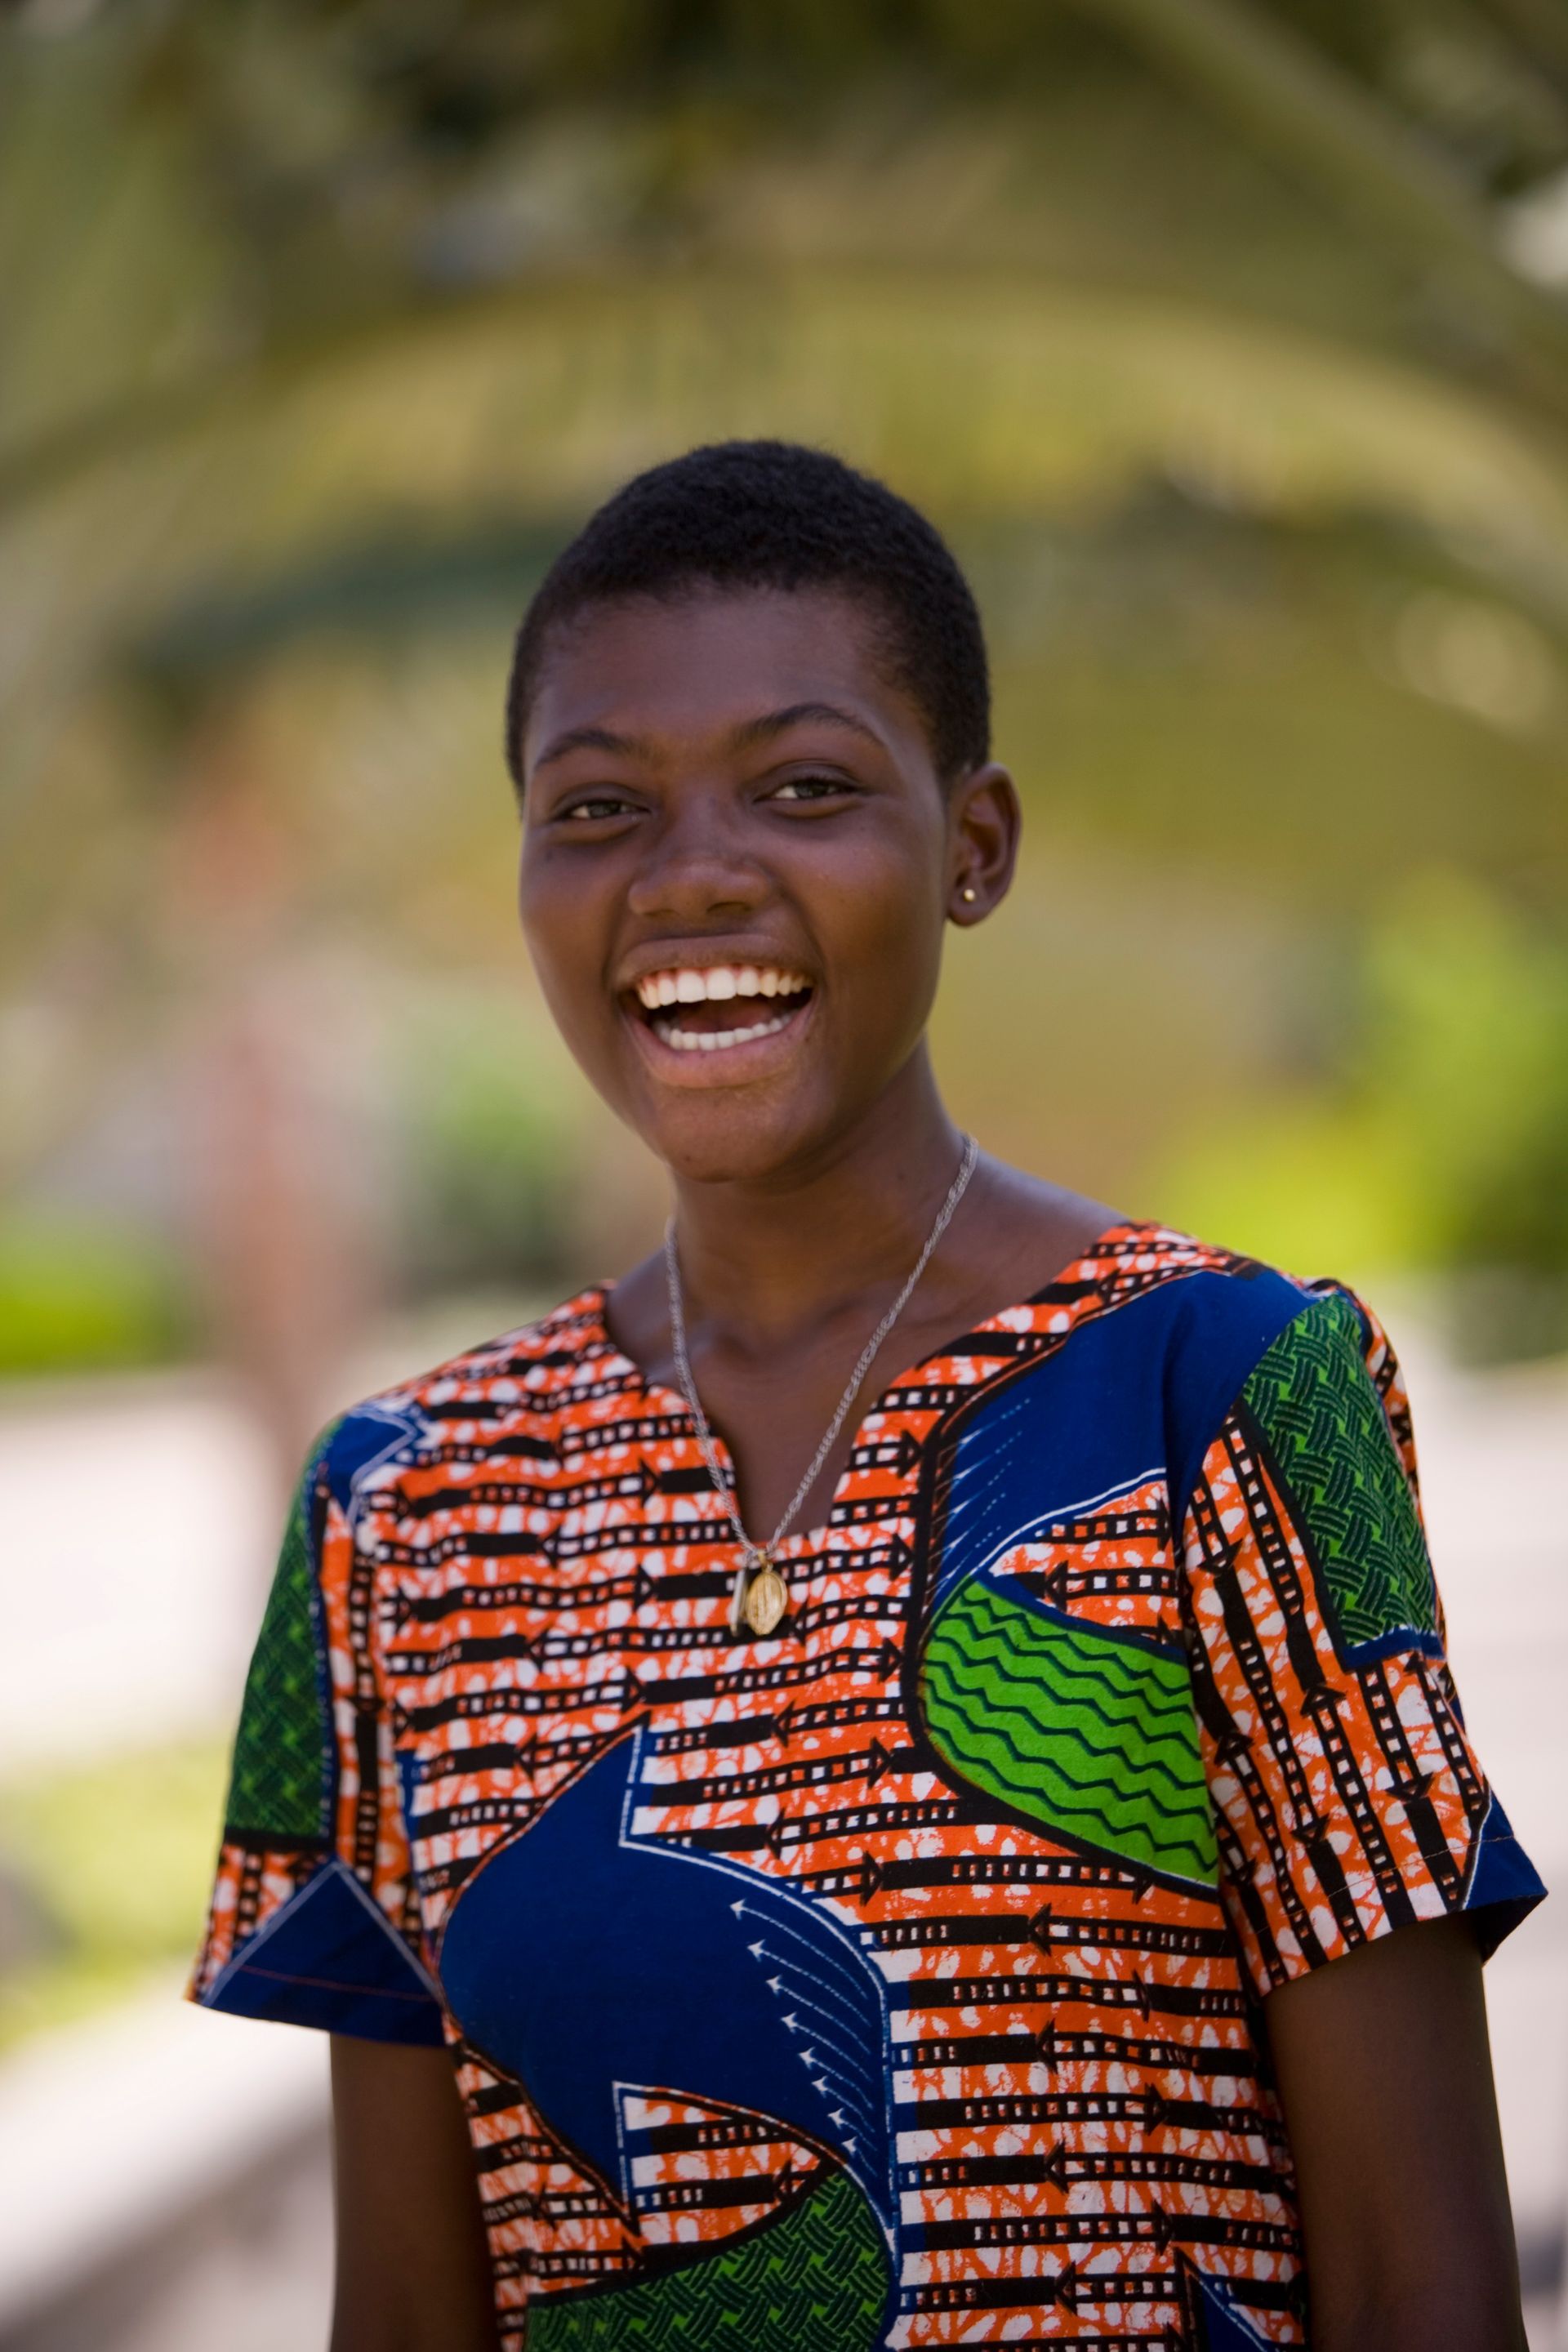 A portrait of a young woman from Ghana laughing.